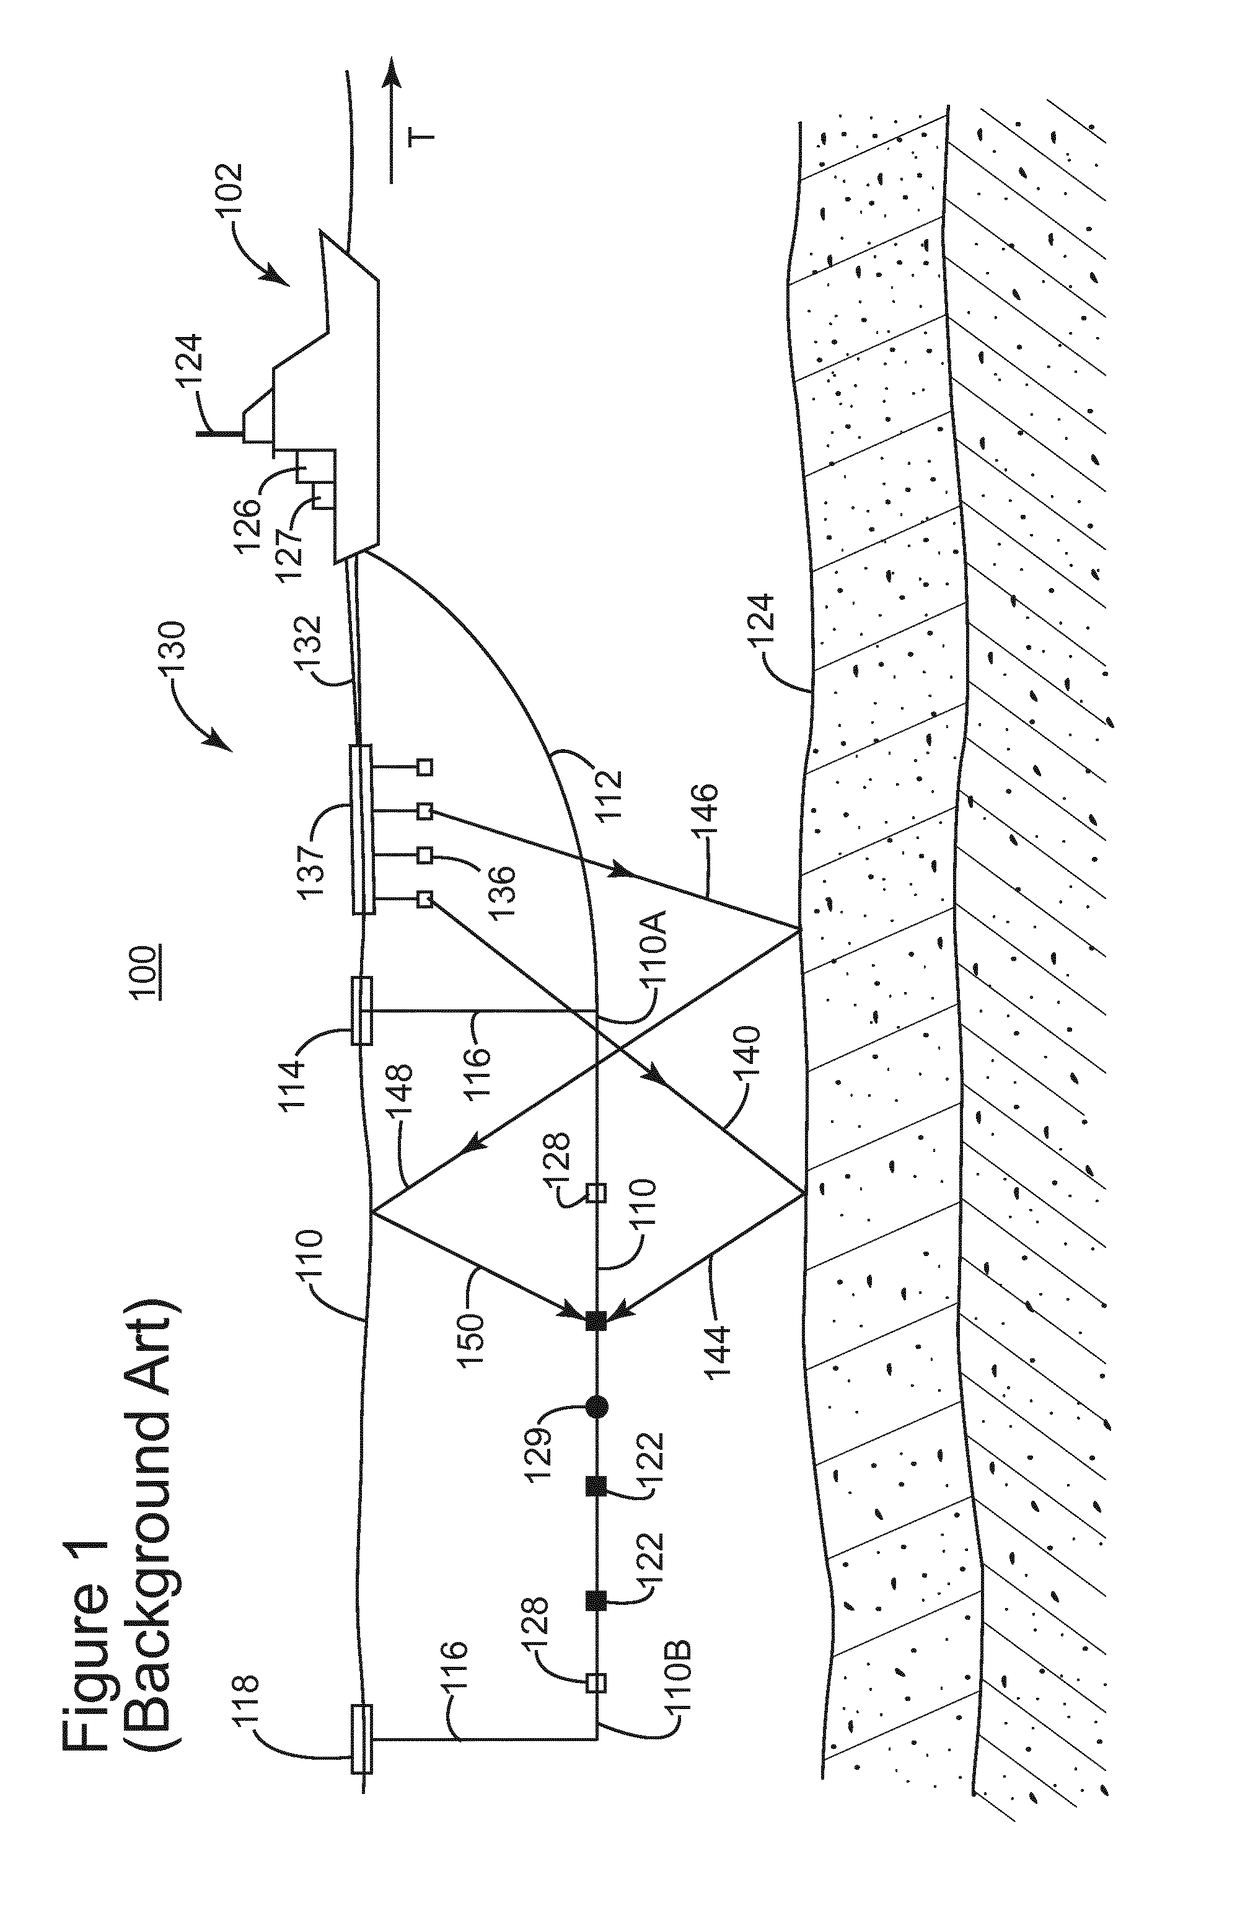 Method and system for simultaneous acquisition of pressure and pressure derivative data with ghost diversity